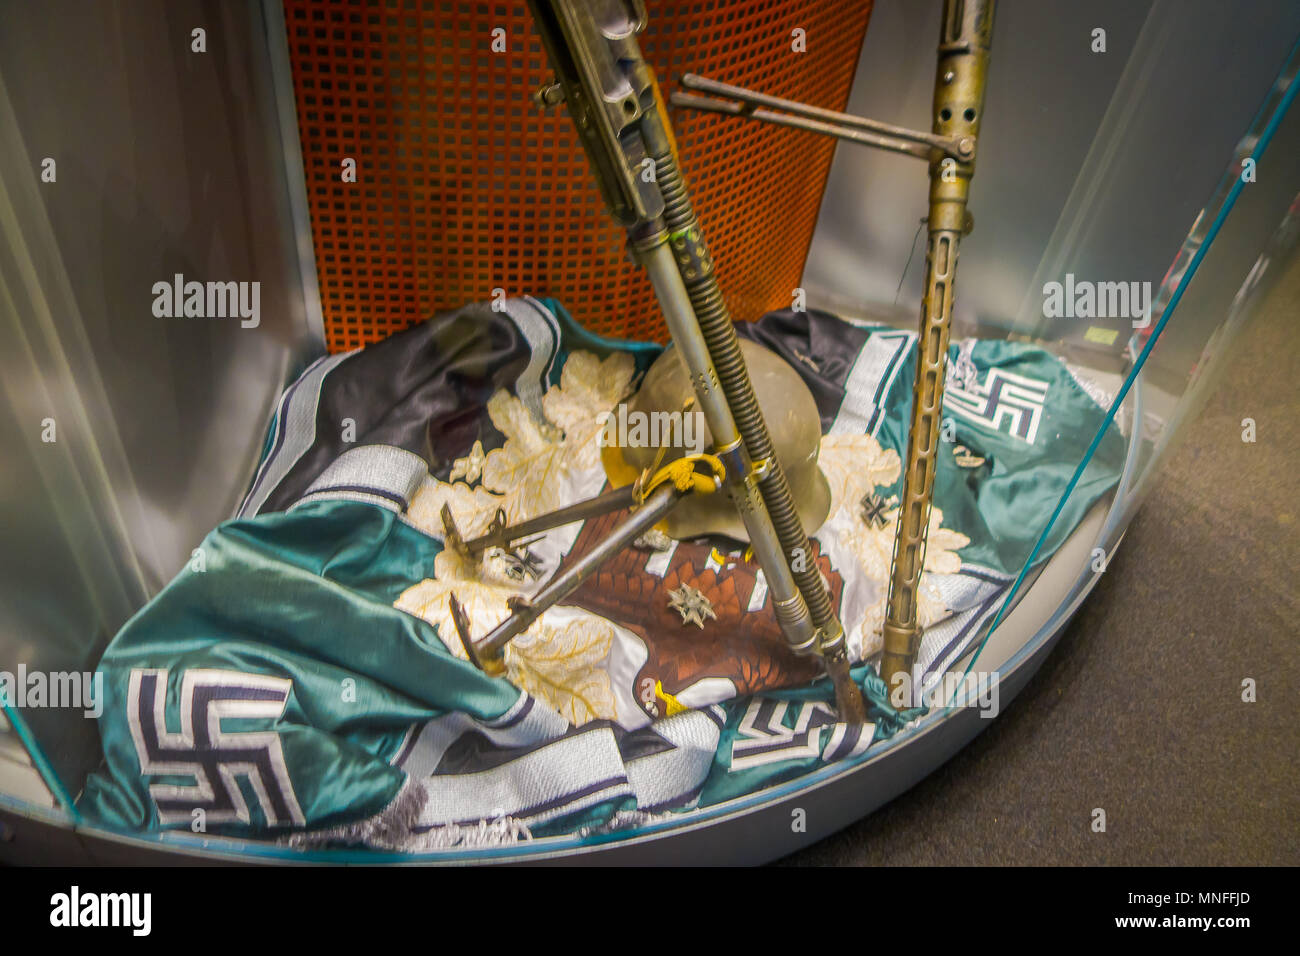 BELARUS, MINSK - MAY 01, 2018: Close up of helmet and gun over a Hakenkreuz swastika nazi sign over a green brand inside of State Museum of the Great Patriotic War of the museum in Minsk Stock Photo